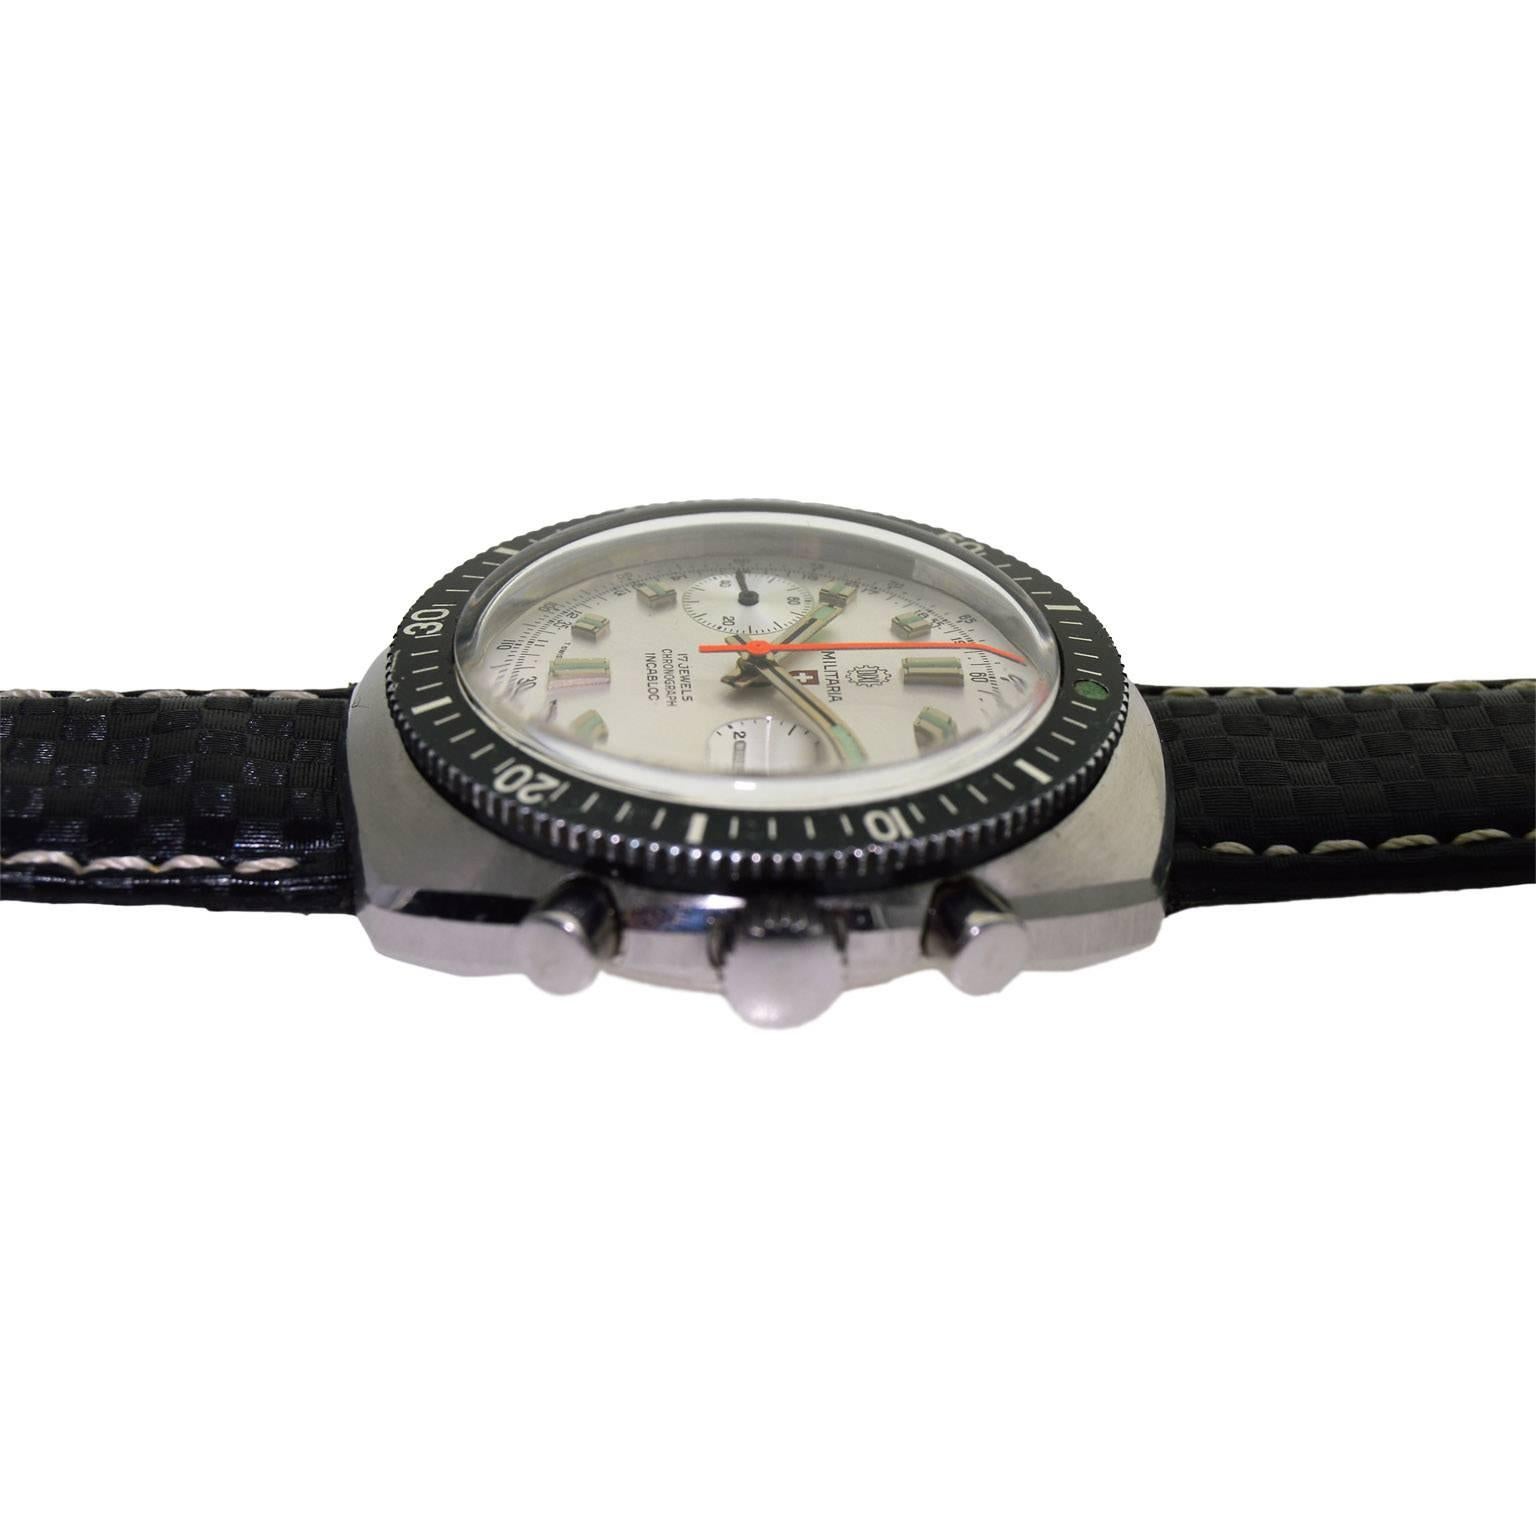 Militaria Stainless Steel Stock Sport Chronograph Manual Wrist Watch, 1970s In New Condition For Sale In Long Beach, CA